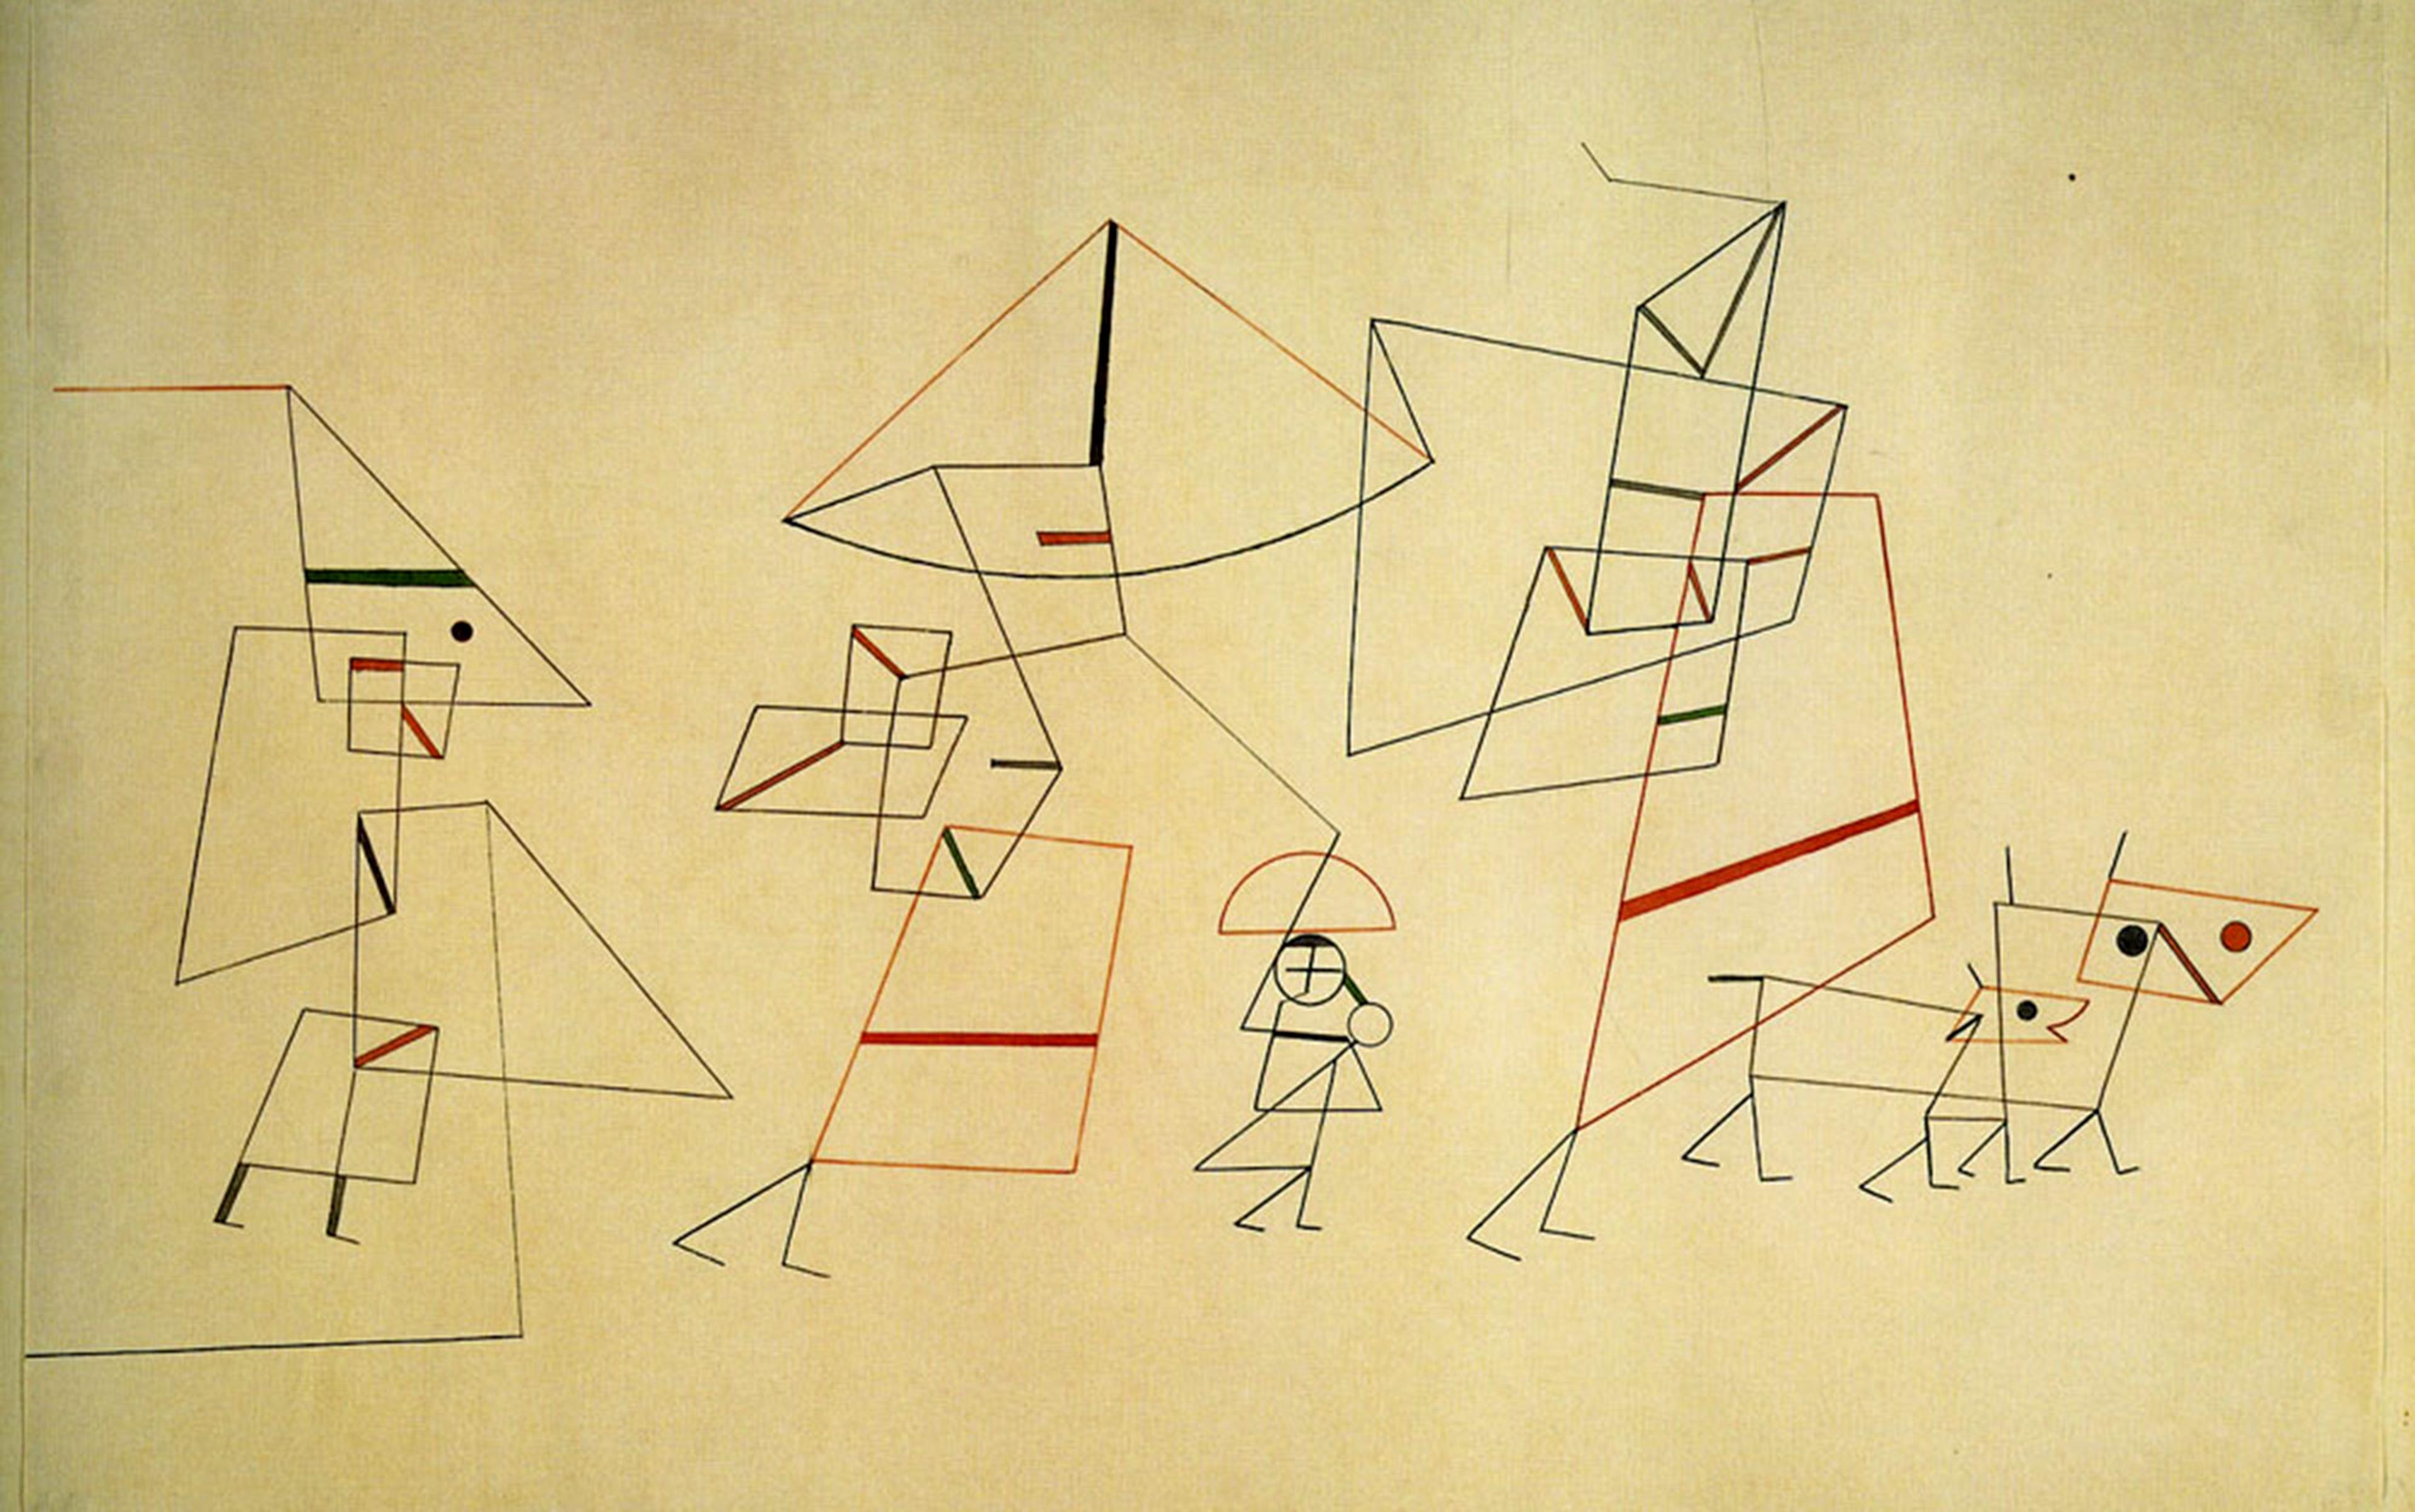 Artwork depicting a family group composed of angular lines and triangles, some but not all coloured, on a paper background